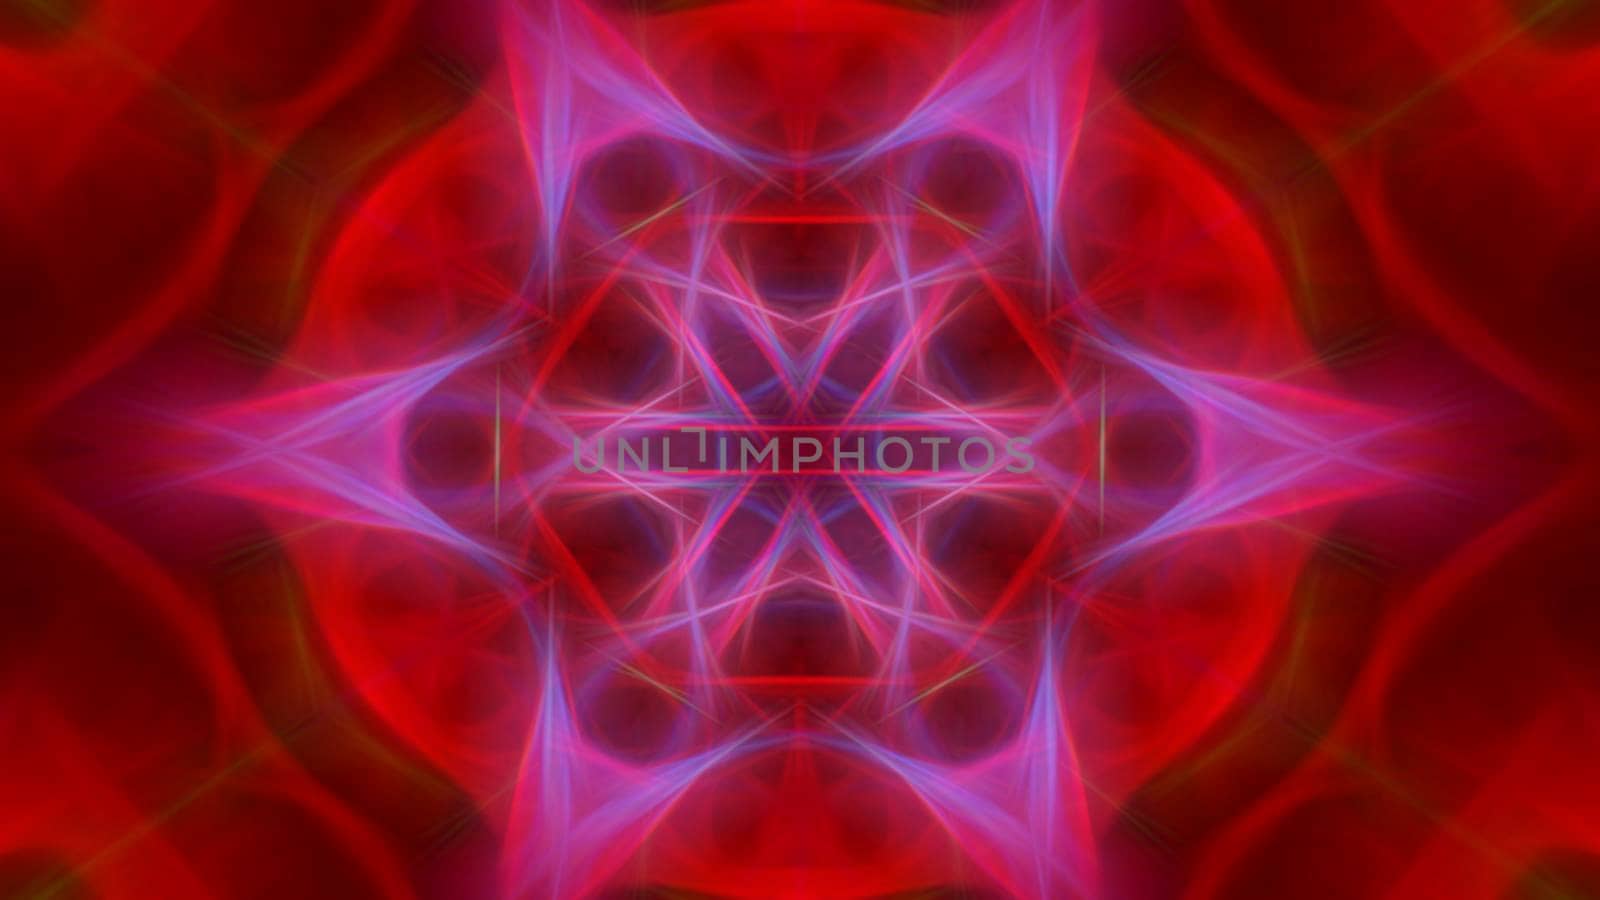 Abstract fractal pink red background. For the design